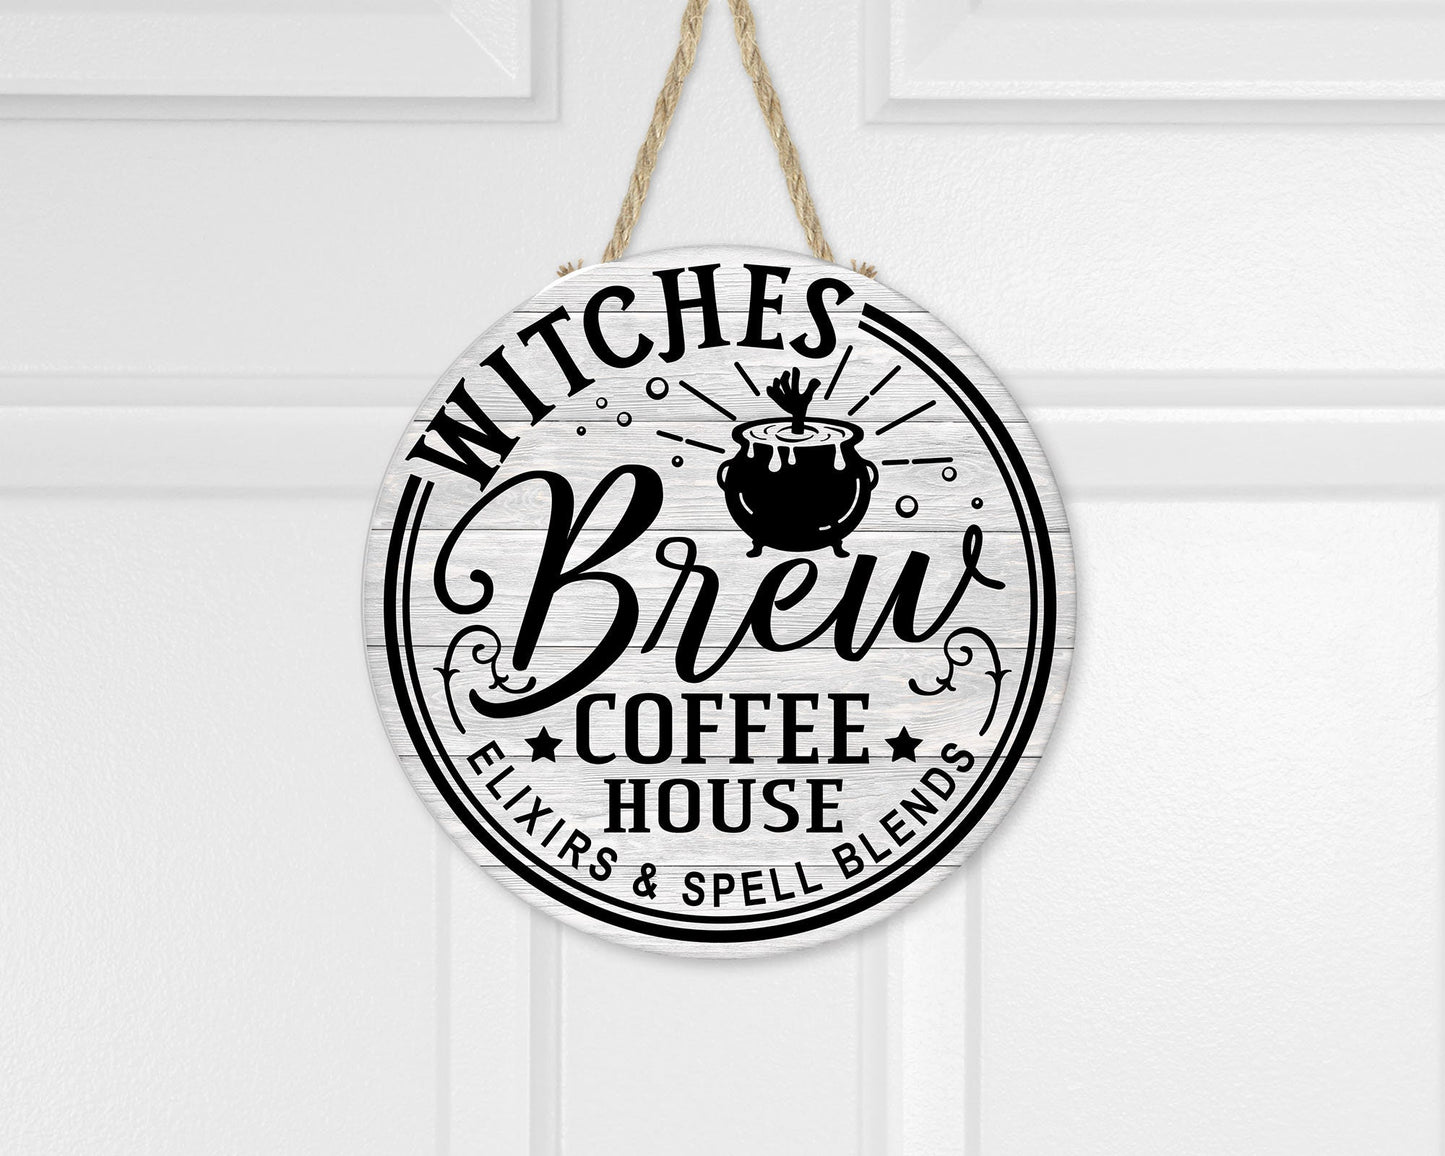 Witches Brew Coffee House Round Hanging Wall Sign Wood Home Decor, Hippie Decor, Door Hanger, Wreath Sign,